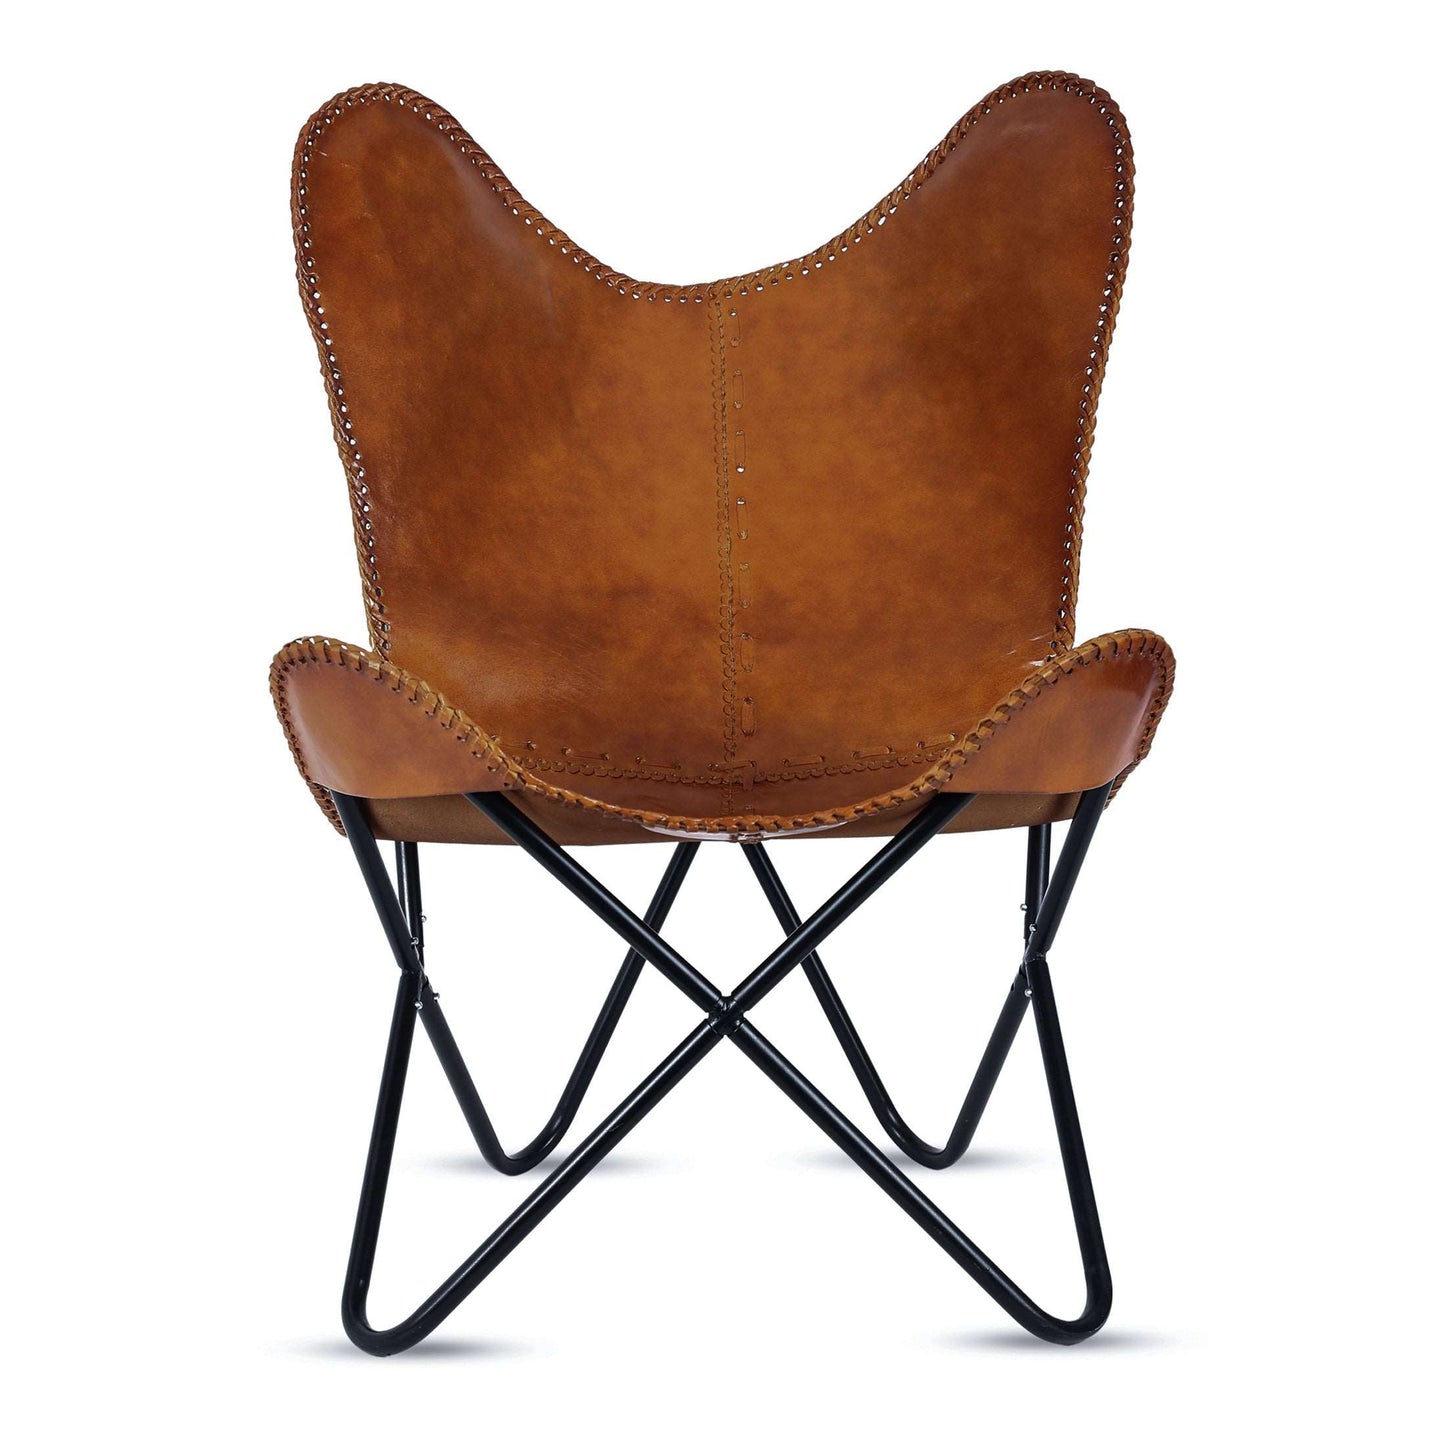 Leather Handmade Butterfly Chair with Folding Chair Stand leather living room chair leather butterfly chair